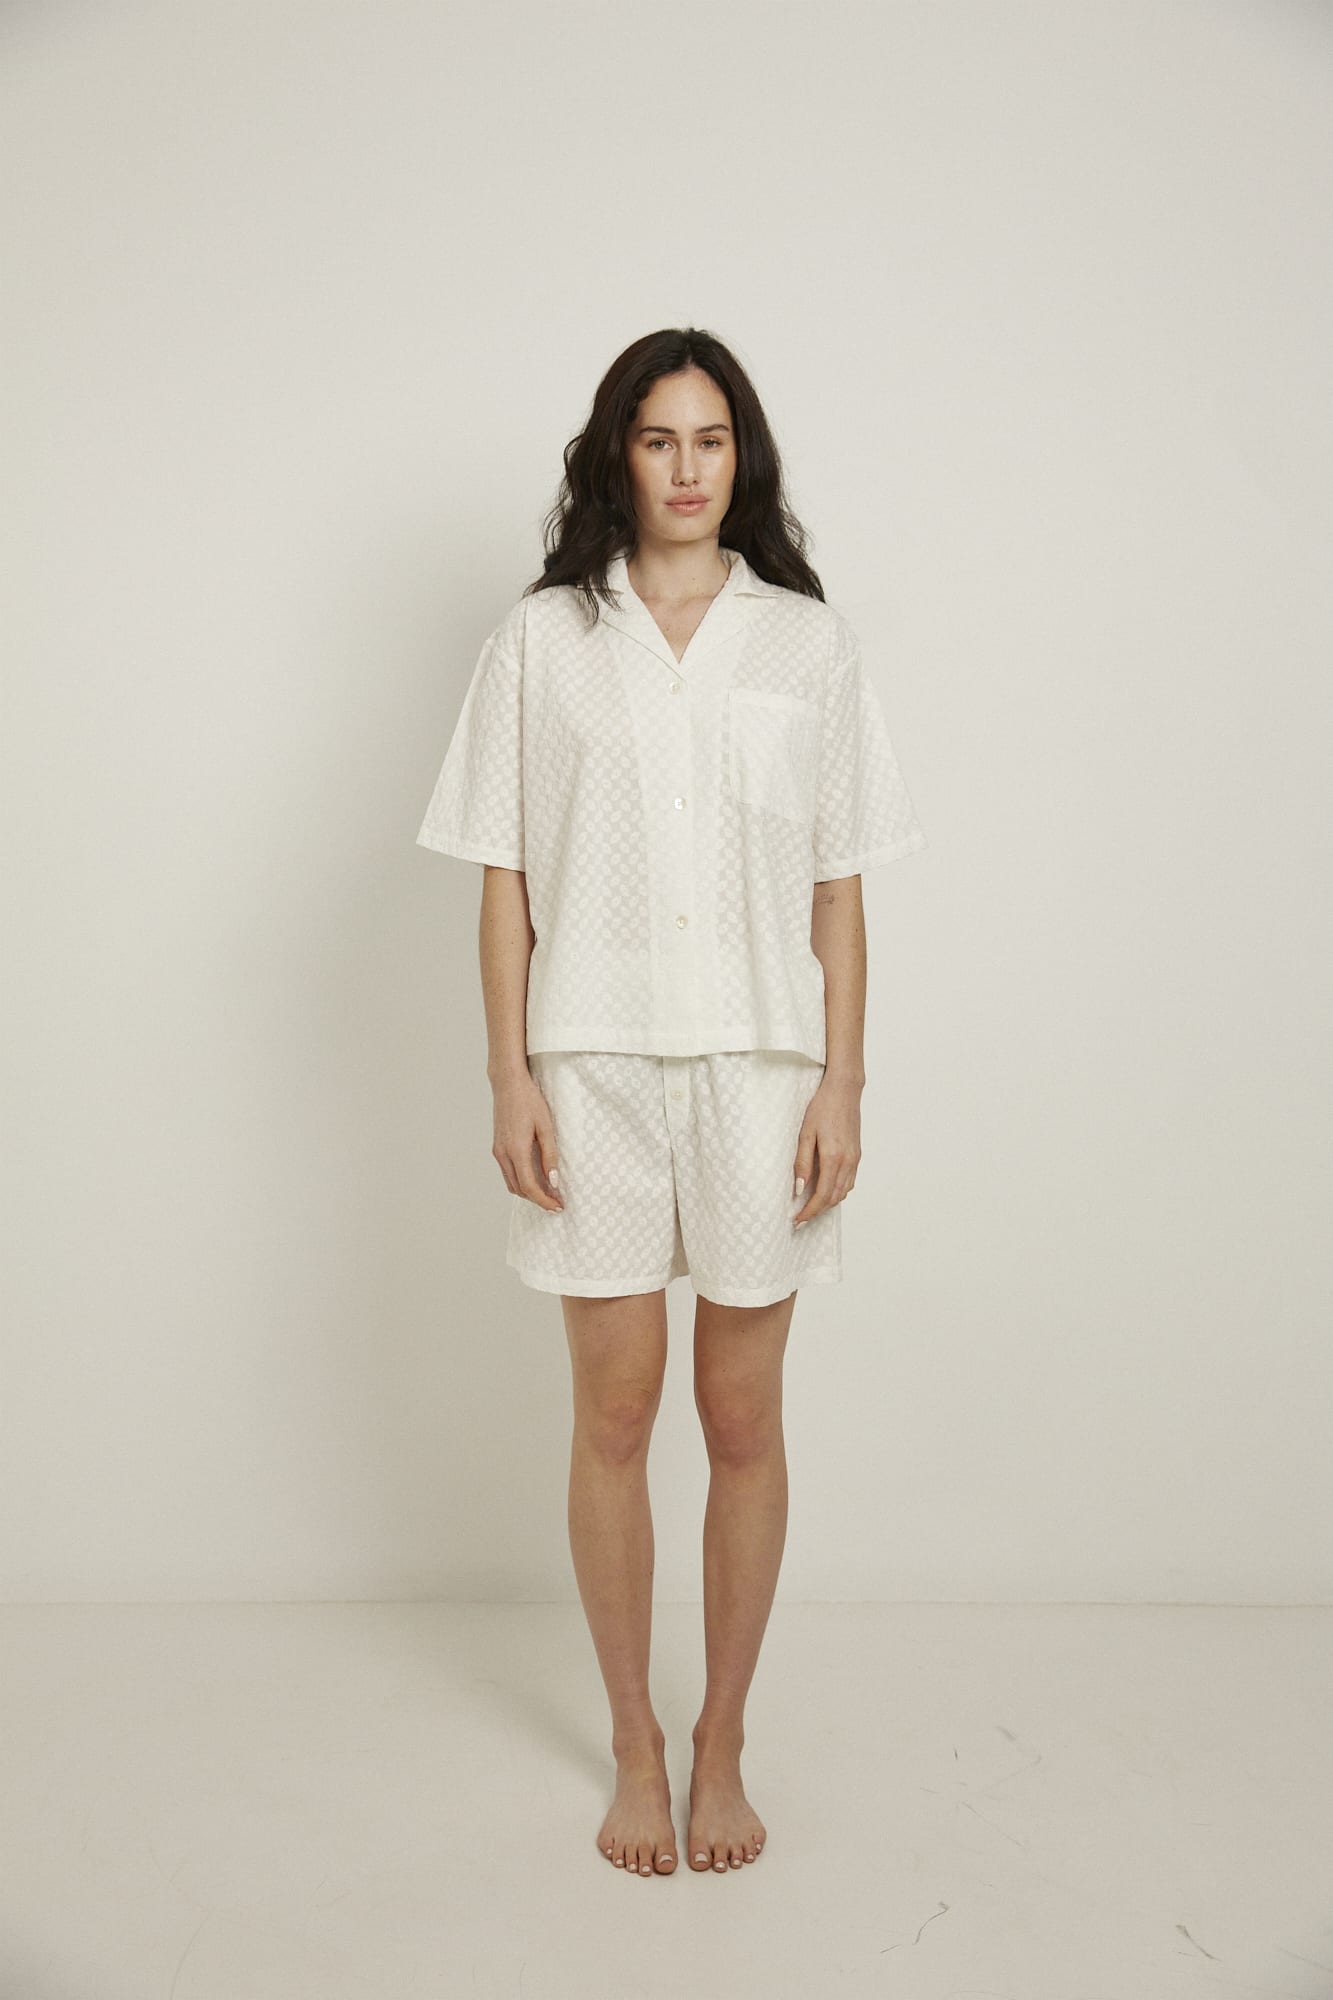 Women’s pyjama set including a short sleeve shirt and shorts. Made from 100% organic cotton, in white colour featuring delicate all over embroidery. The shirt has shell buttons, a front pocket and a back pleat with locker loop detail.  The shorts feature natural shell buttons and an elasticated waistband for comfort.